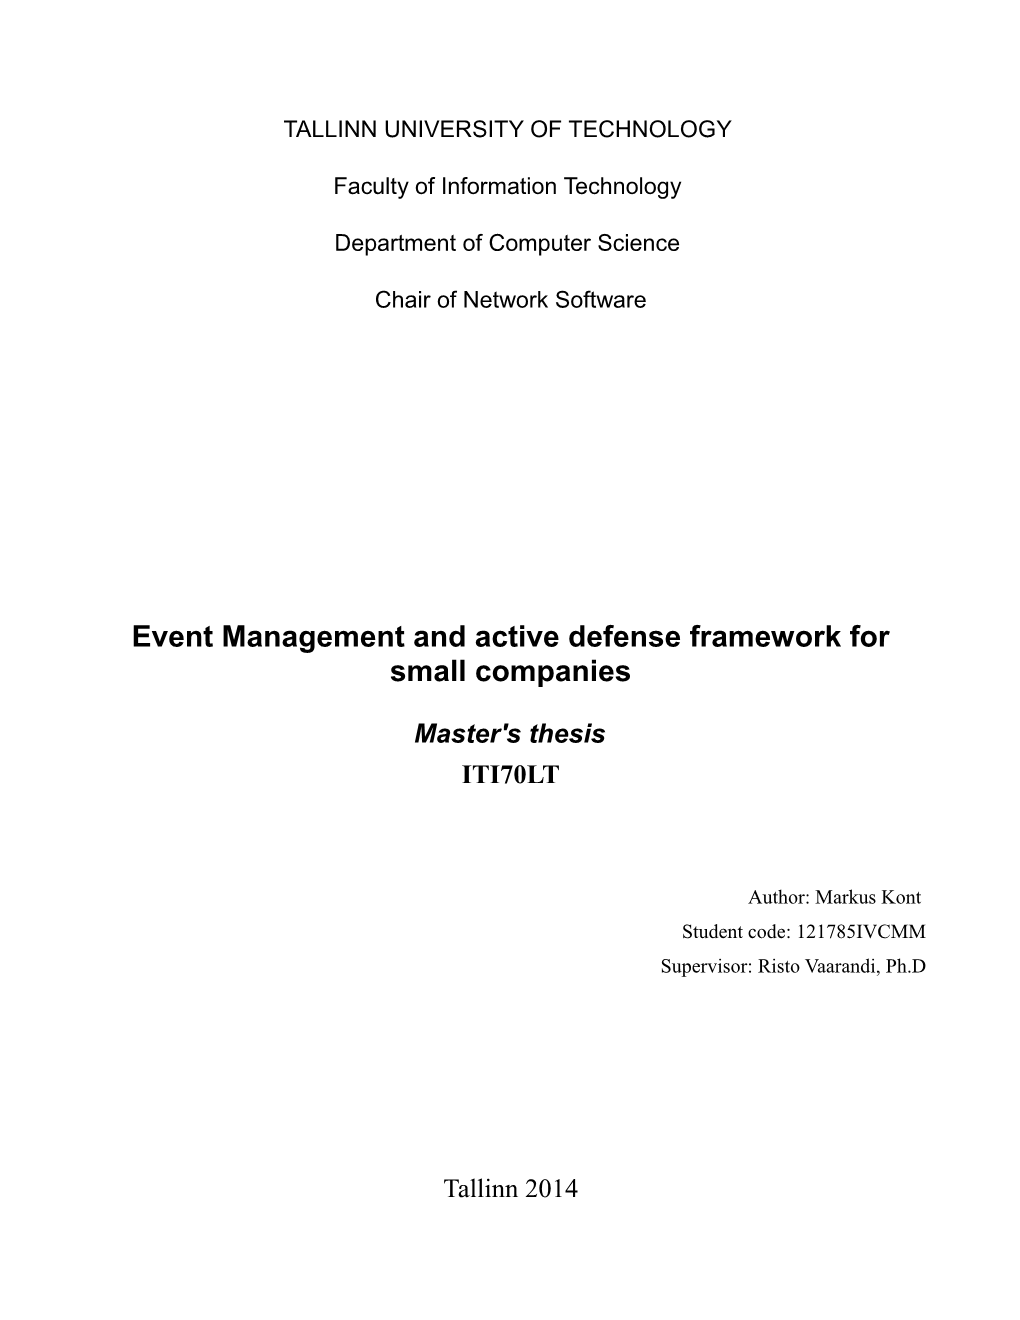 Event Management and Active Defense Framework for Small Companies